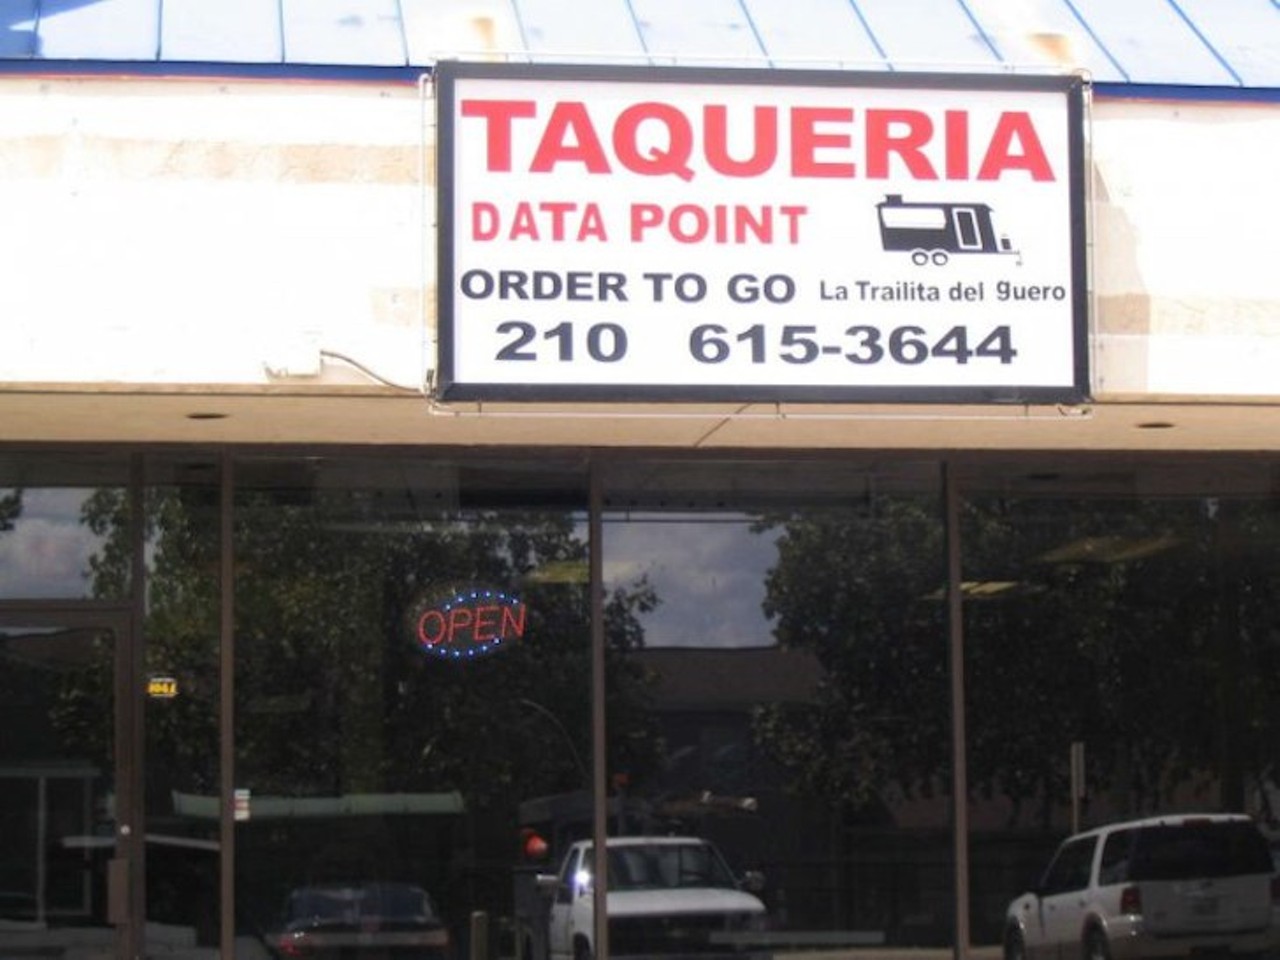  Taqueria Data Point 
4063 Medical Drive, (210) 615-3644, facebook.com/taqueria.datapoint
Get your breakfast tacos any time of day here. 
Photo via Zomato (Taqueria Datapoint)